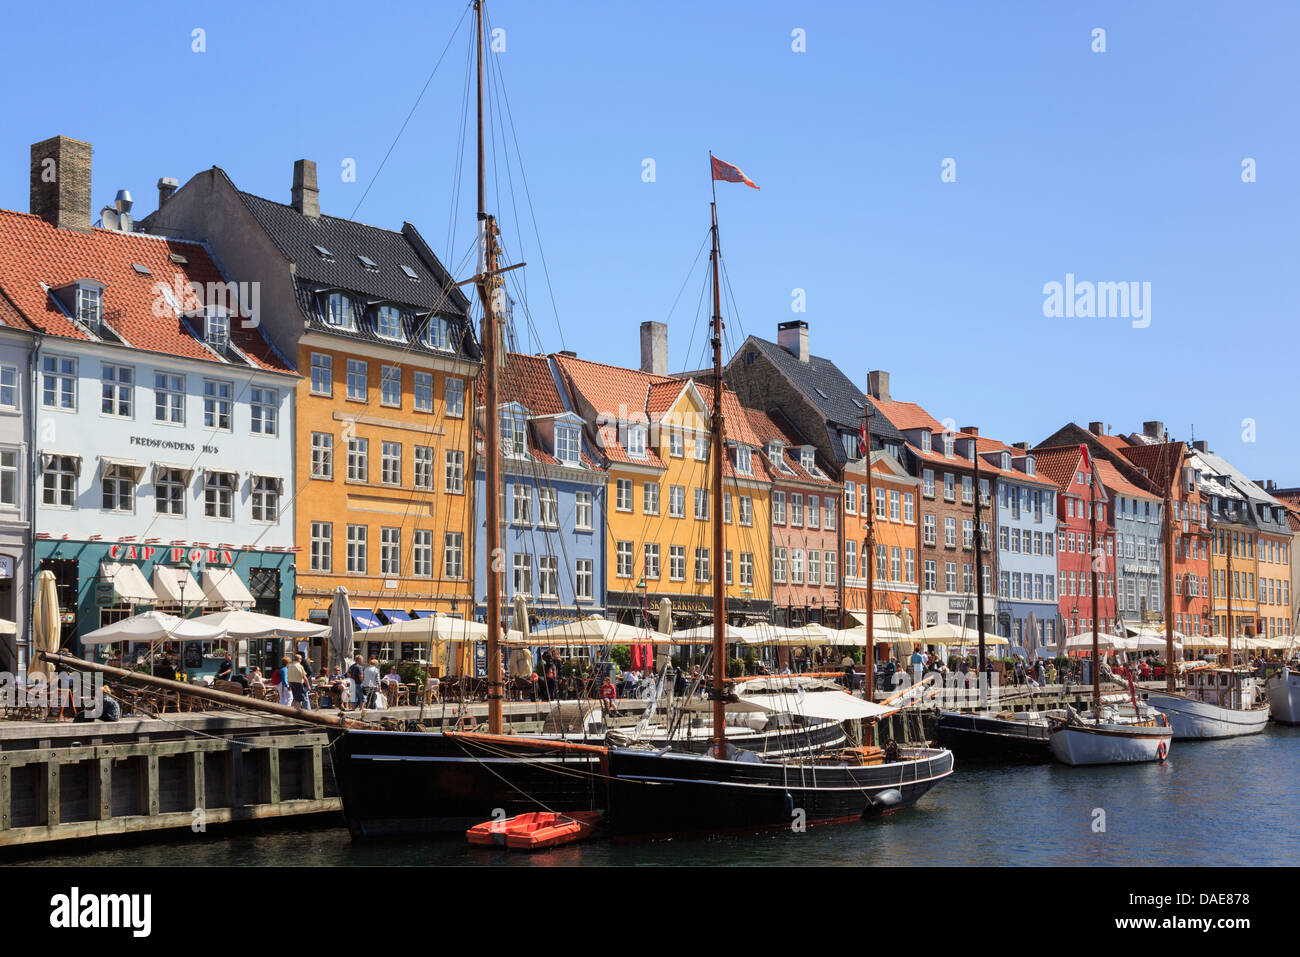 Old wooden boats moored by canal quay with colourful 17th century buildings on waterfront in Nyhavn harbour, Copenhagen, Denmark Stock Photo